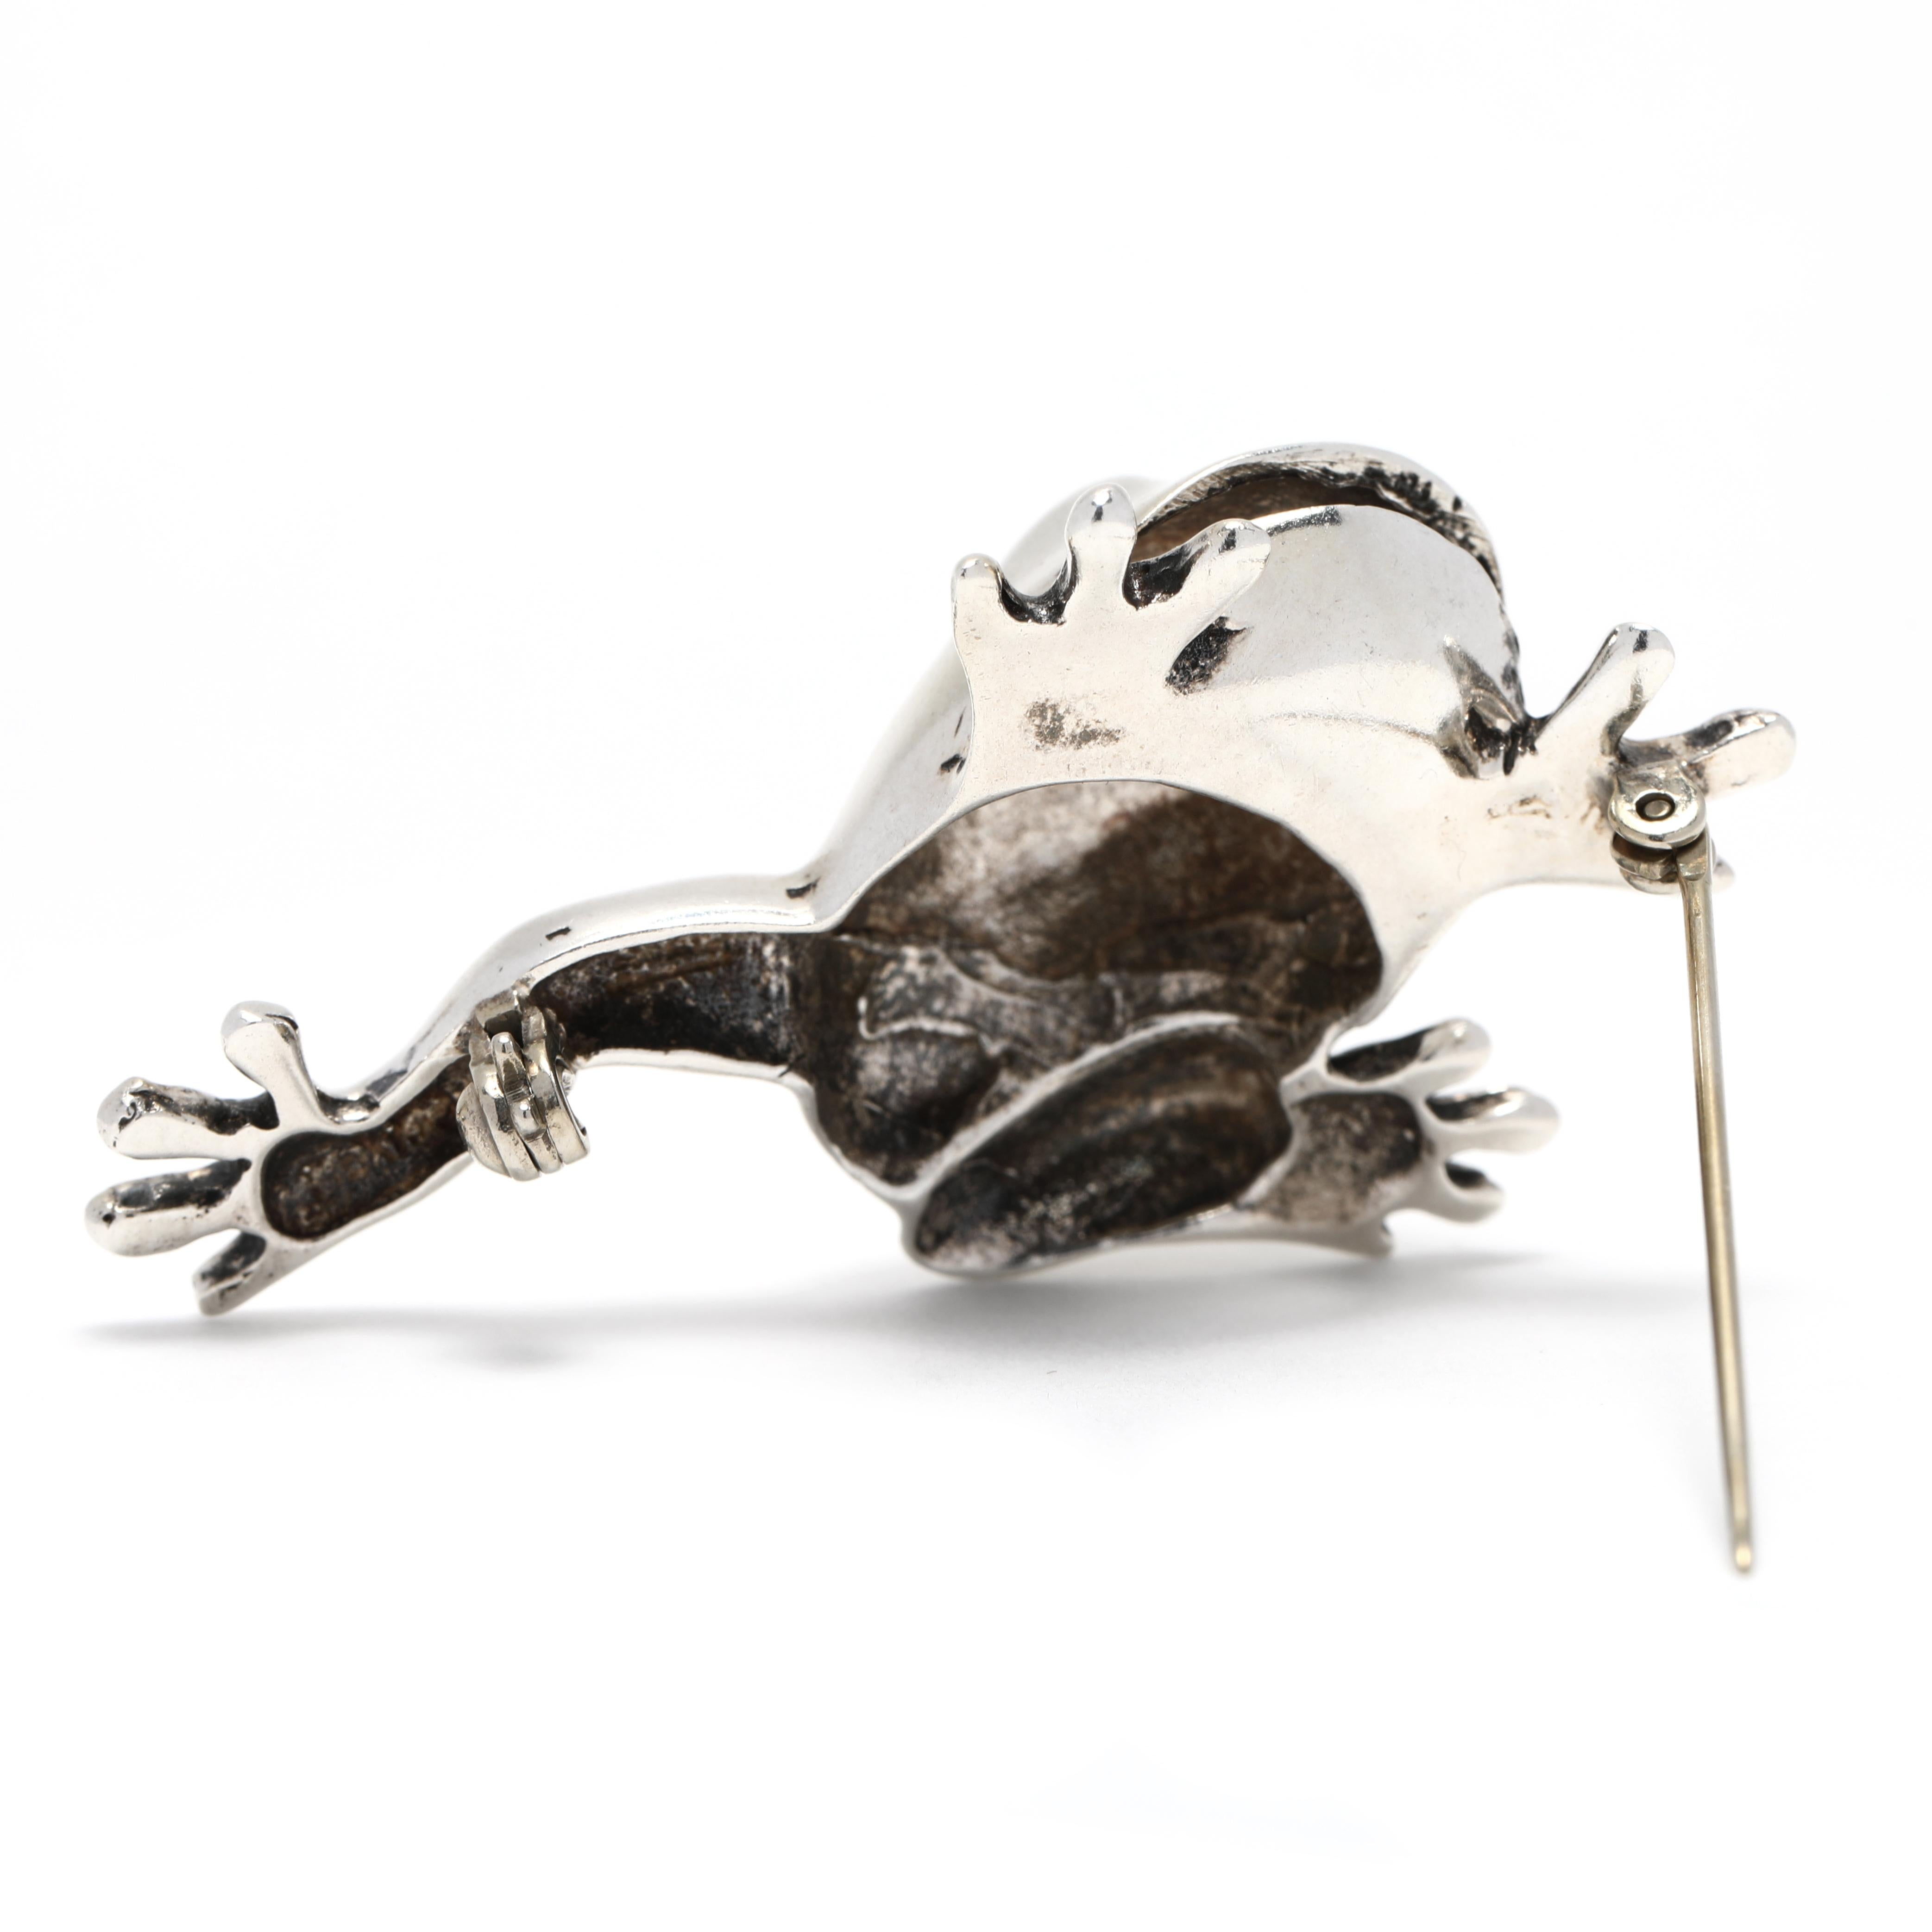 This unique and eye-catching Large Silver Frog Brooch is the perfect way to add a touch of nature to your wardrobe. Crafted from sterling silver, this life size Tree Frog Brooch measures 2 1/8 inches in length for a simple yet eye-catching look.